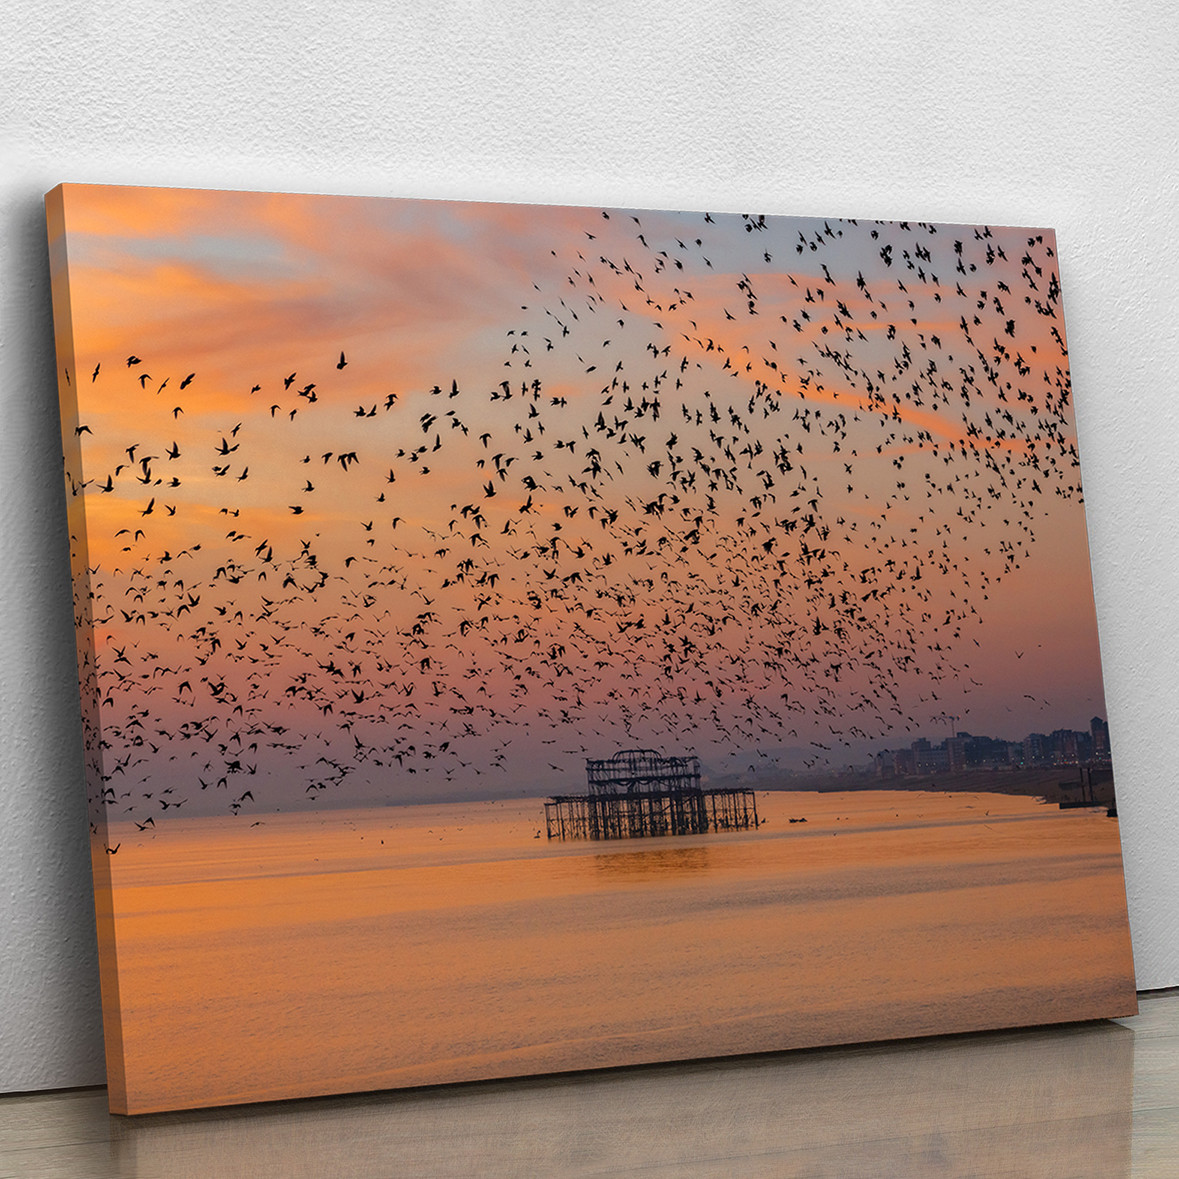 Flight of the starlings - canvas wrap